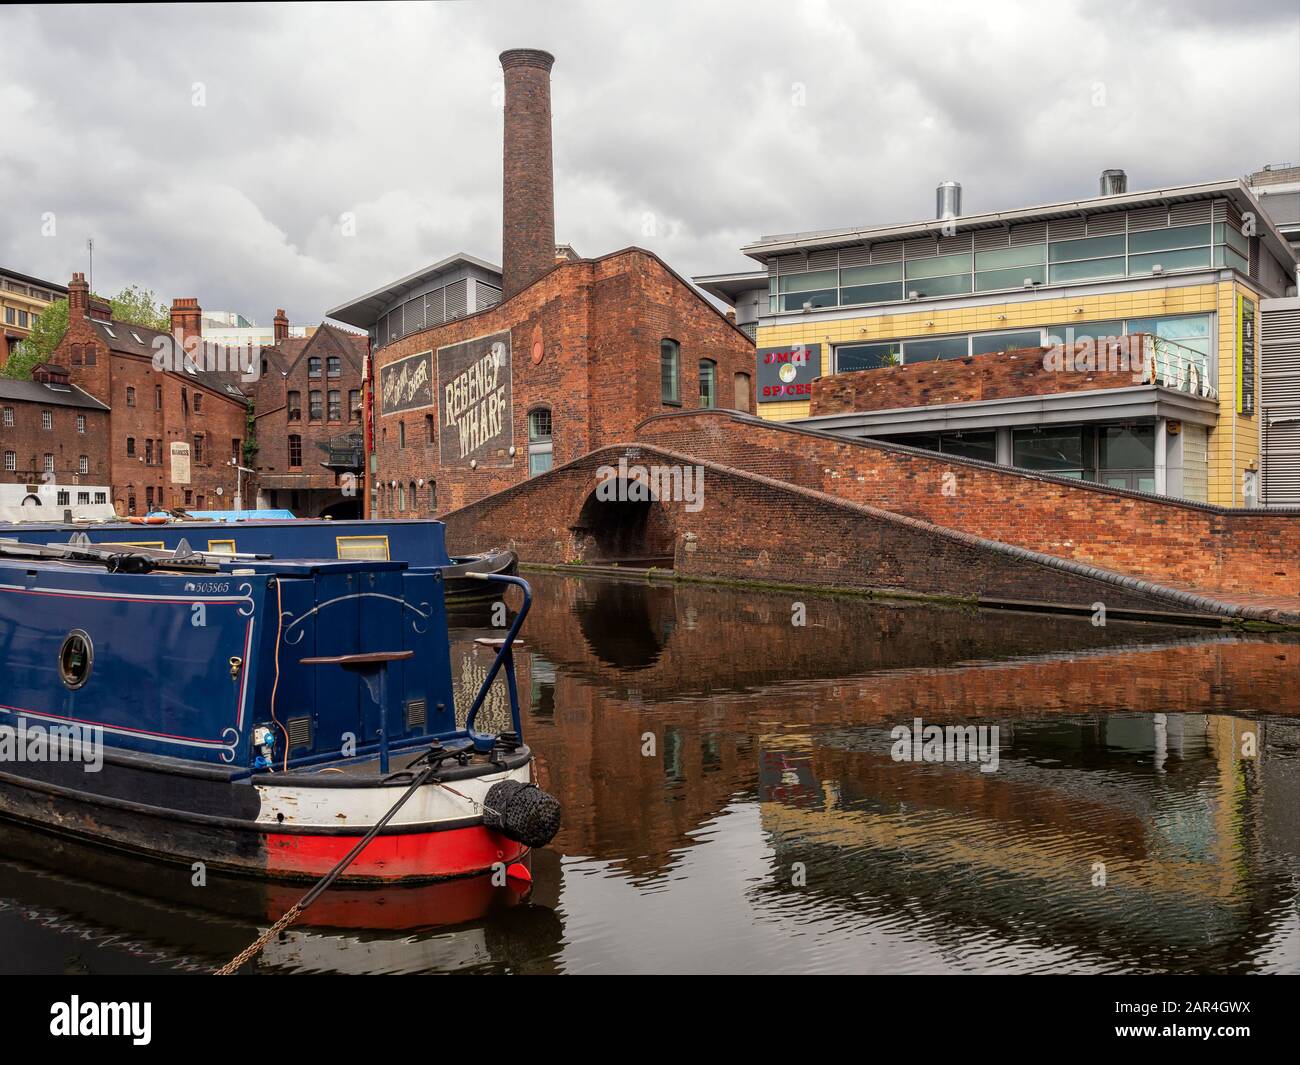 BIRMINGHAM, UK -MAY 28, 2019:  Narrowboat on the canal at Brindley Place surrounded by restored Victorian building and modern office buildings Stock Photo